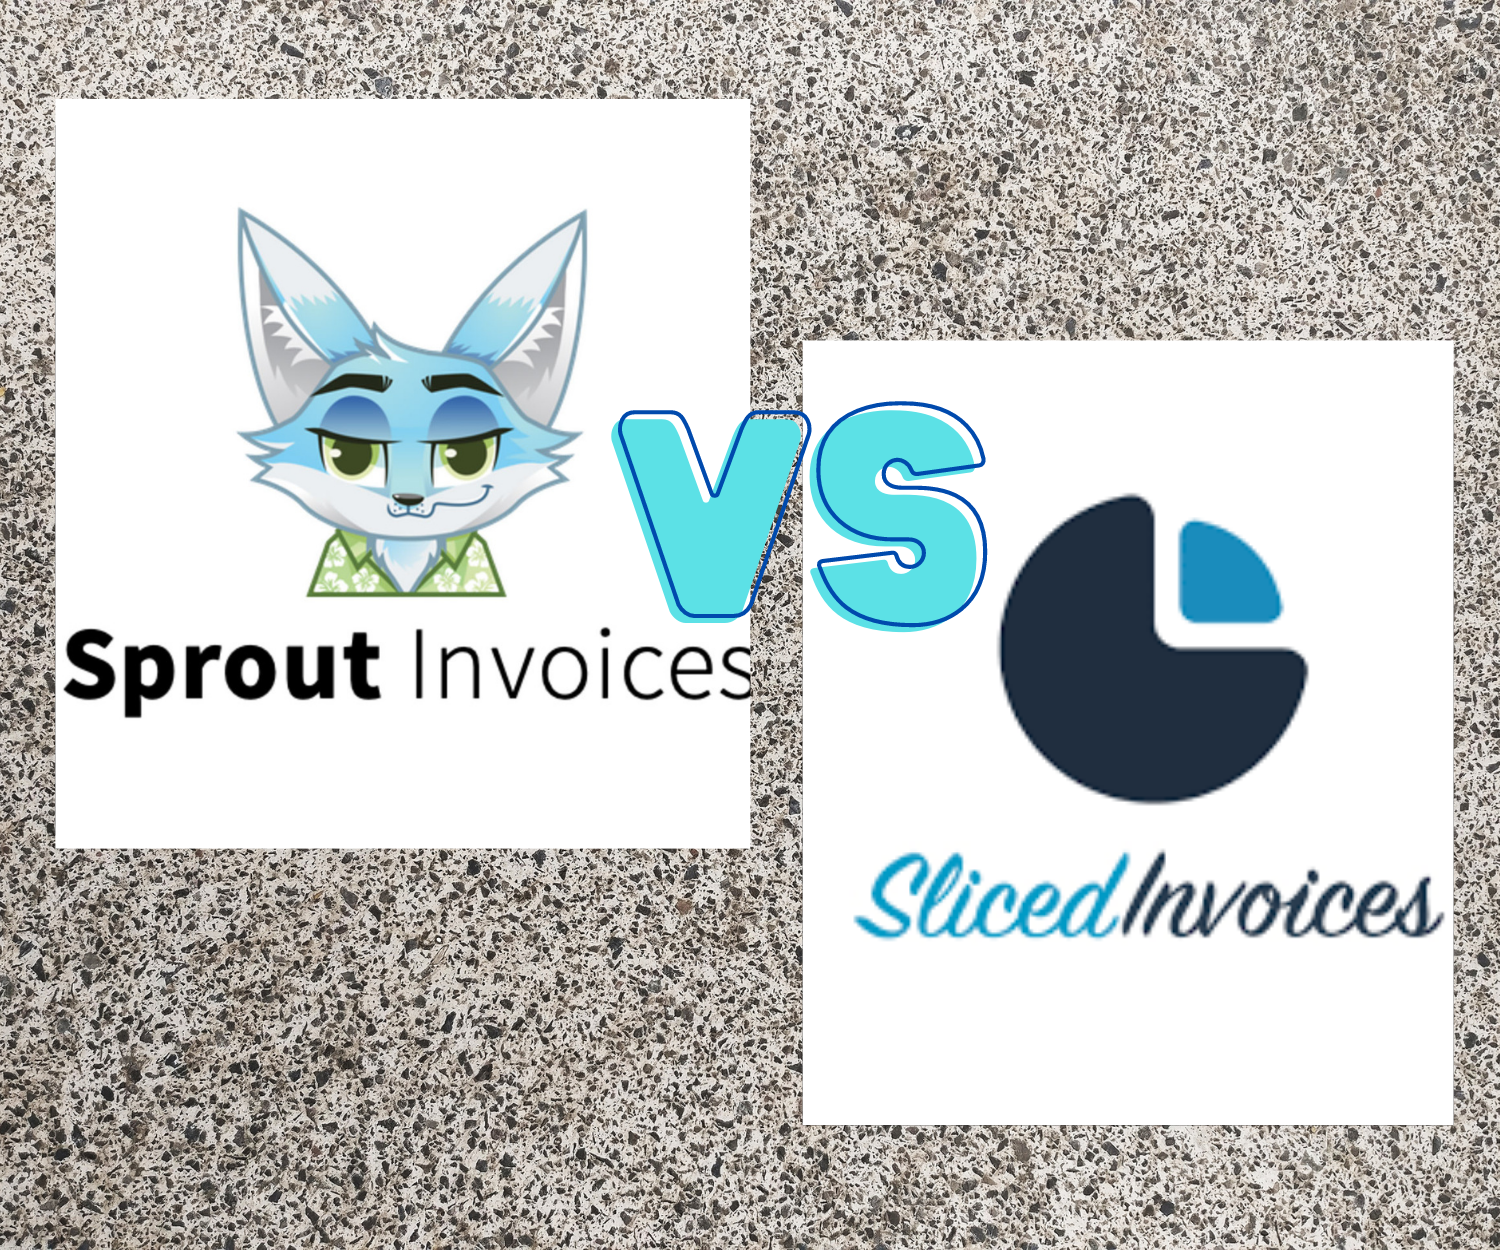 sliced invoices vs sprout invoices